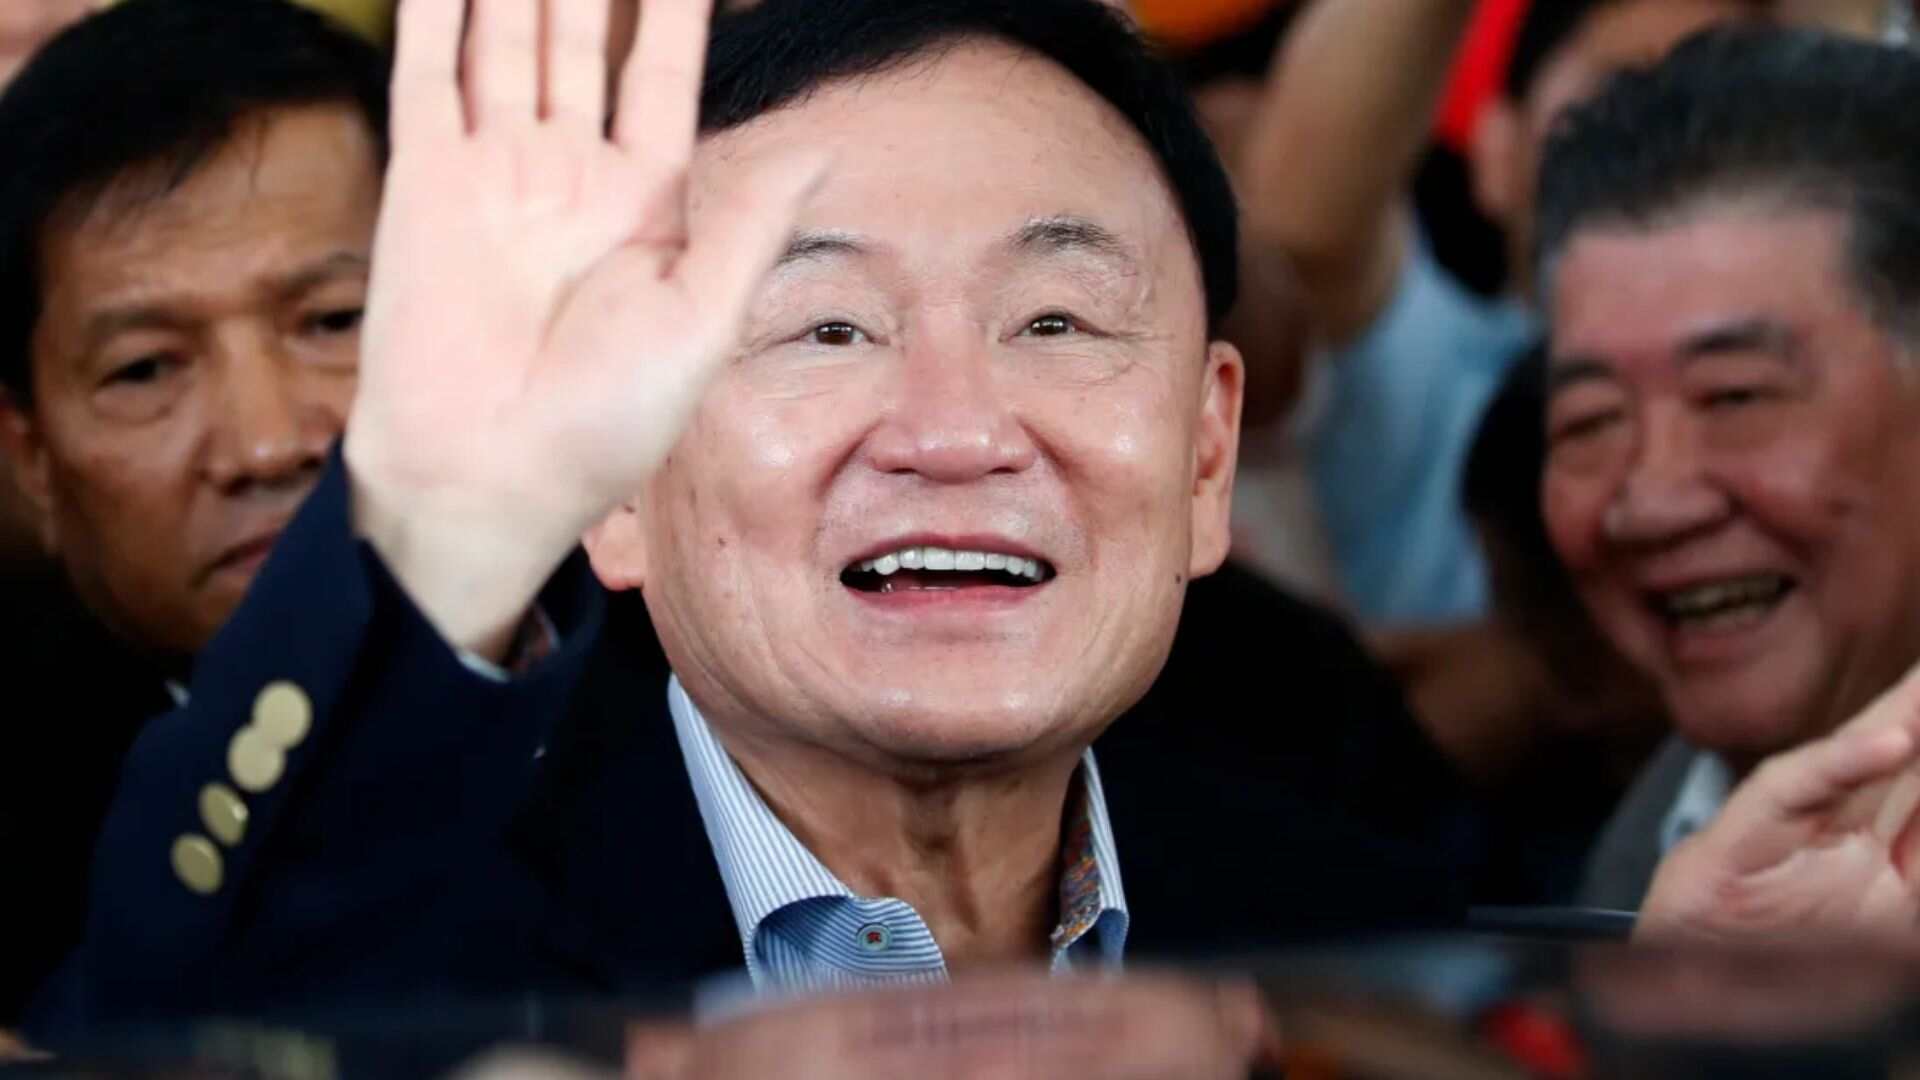 Thailand: Former PM Thaksin Shinawatra Indicted On Lese-Majeste Charges